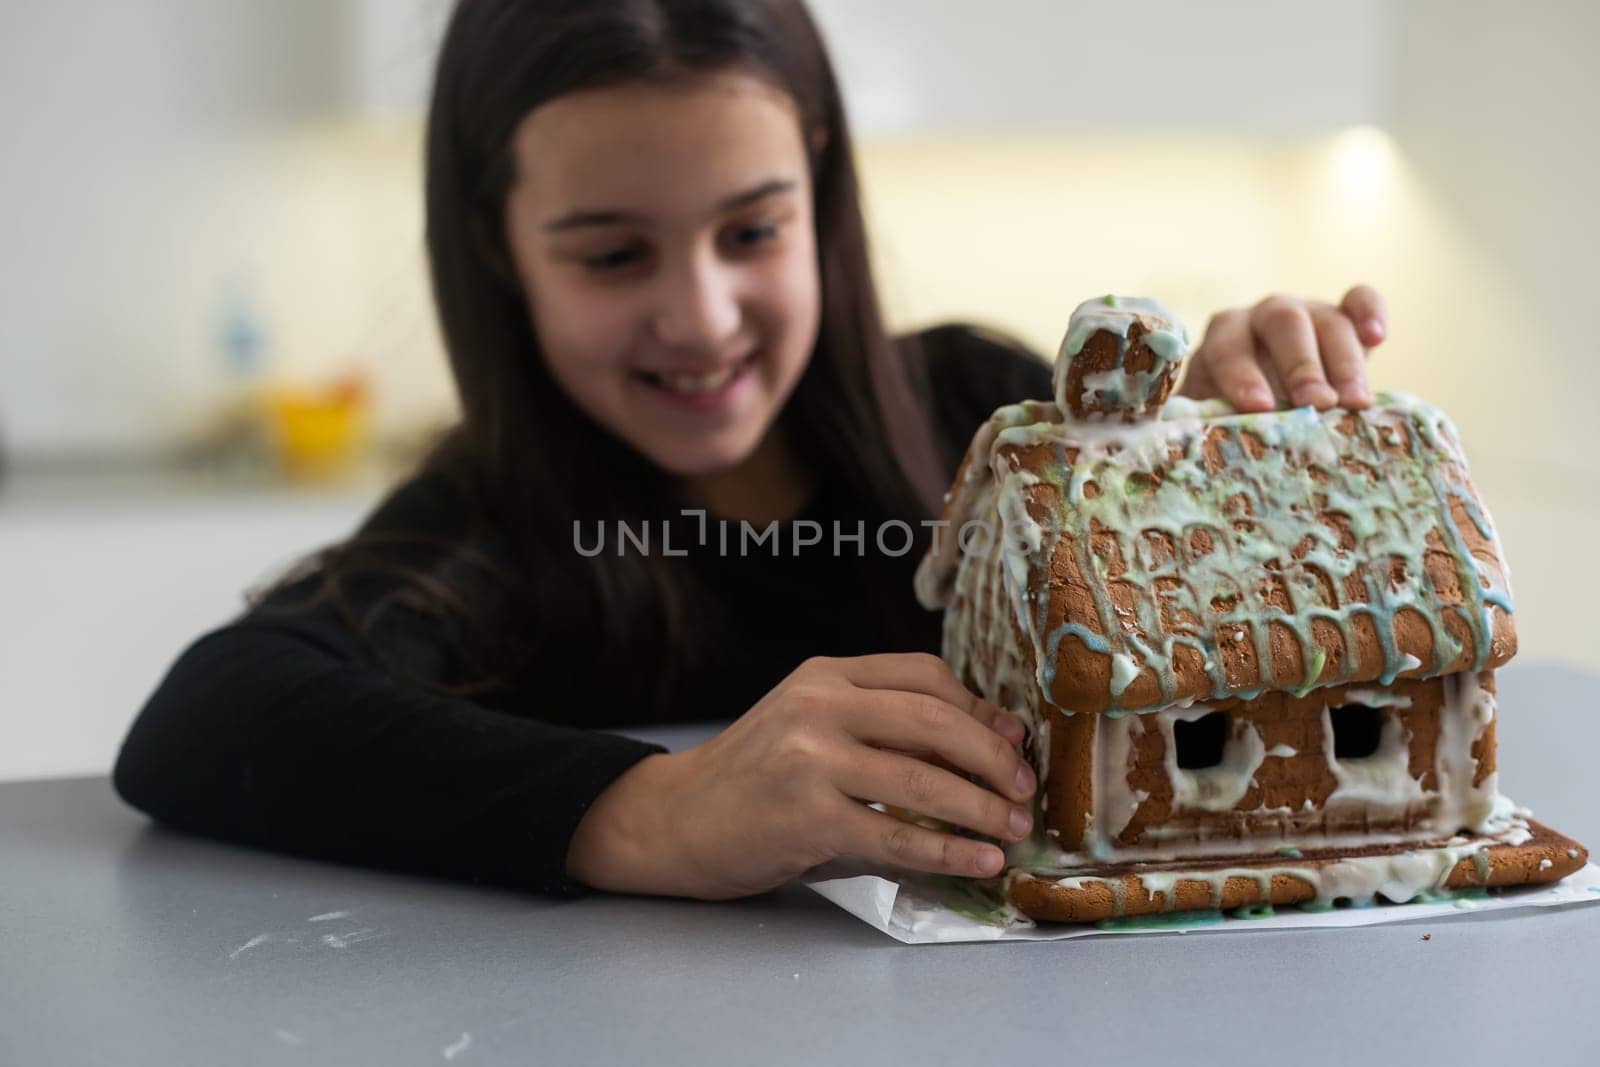 A teenage girl is eating a gingerbread house.